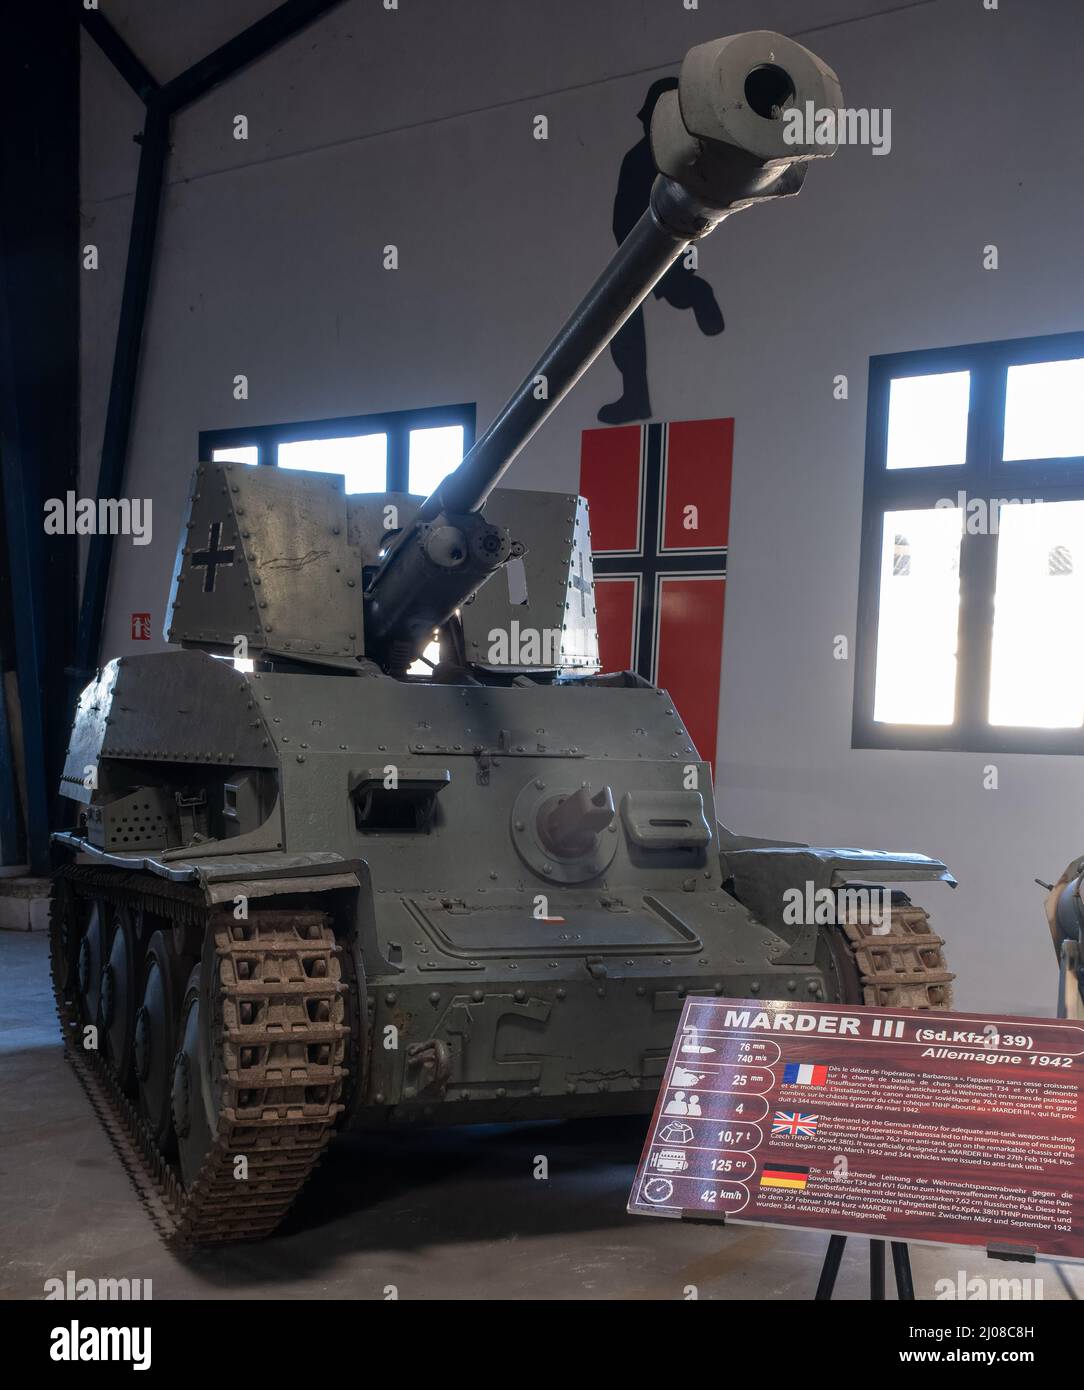 Saumur, France - February 26, 2022:  German Marder III (Sd. Kfz. 139). Tank museum in Saumur (Musee des Blindes). Second world war exhibition. Selecti Stock Photo